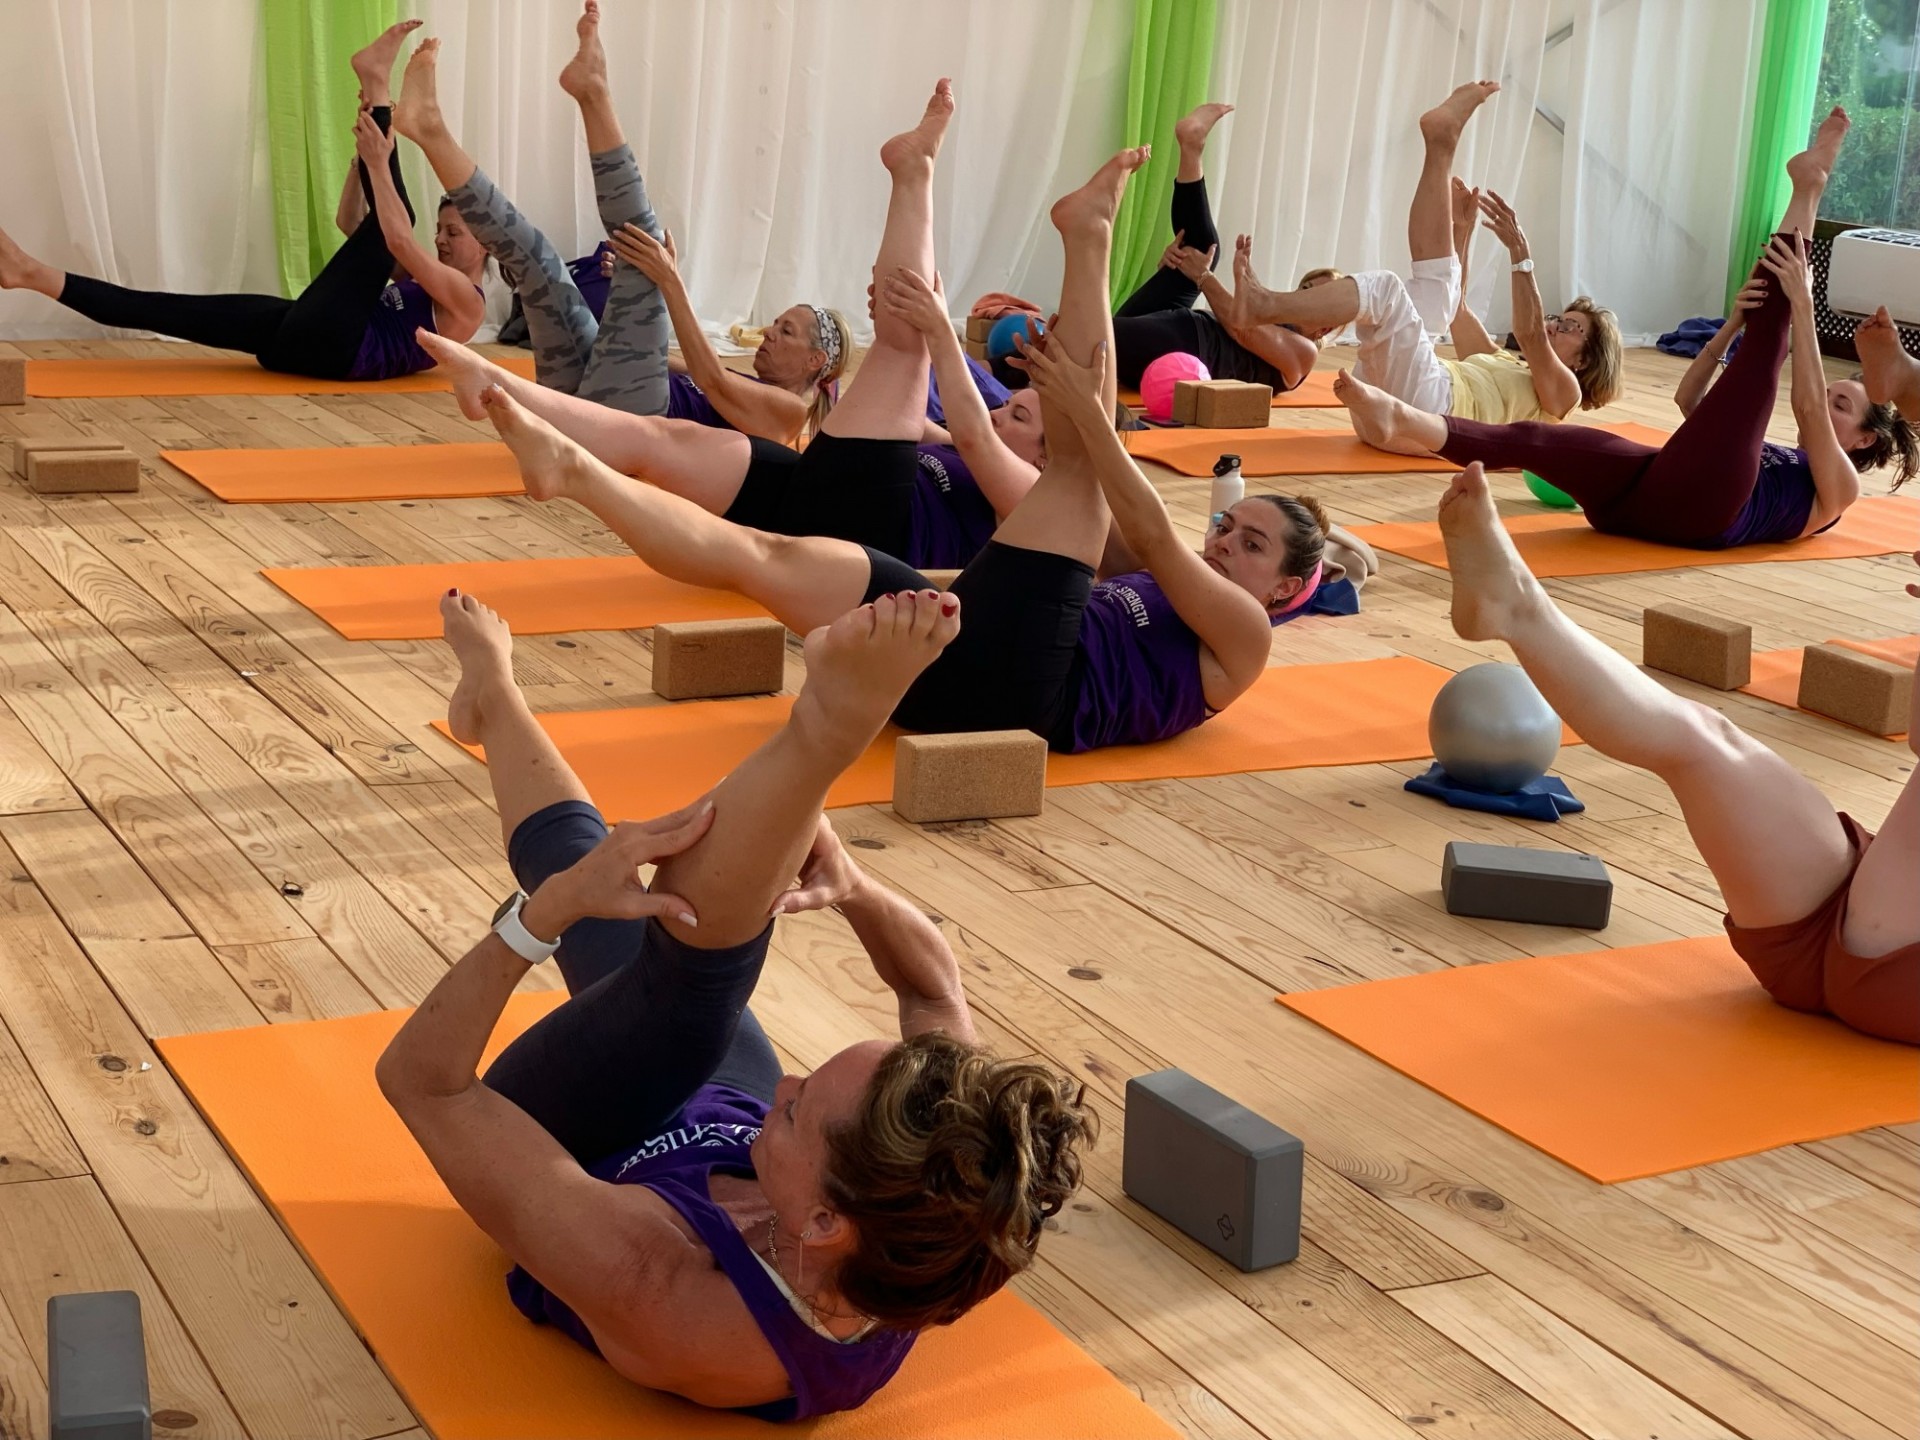 A pilates class doing poses on their mats.